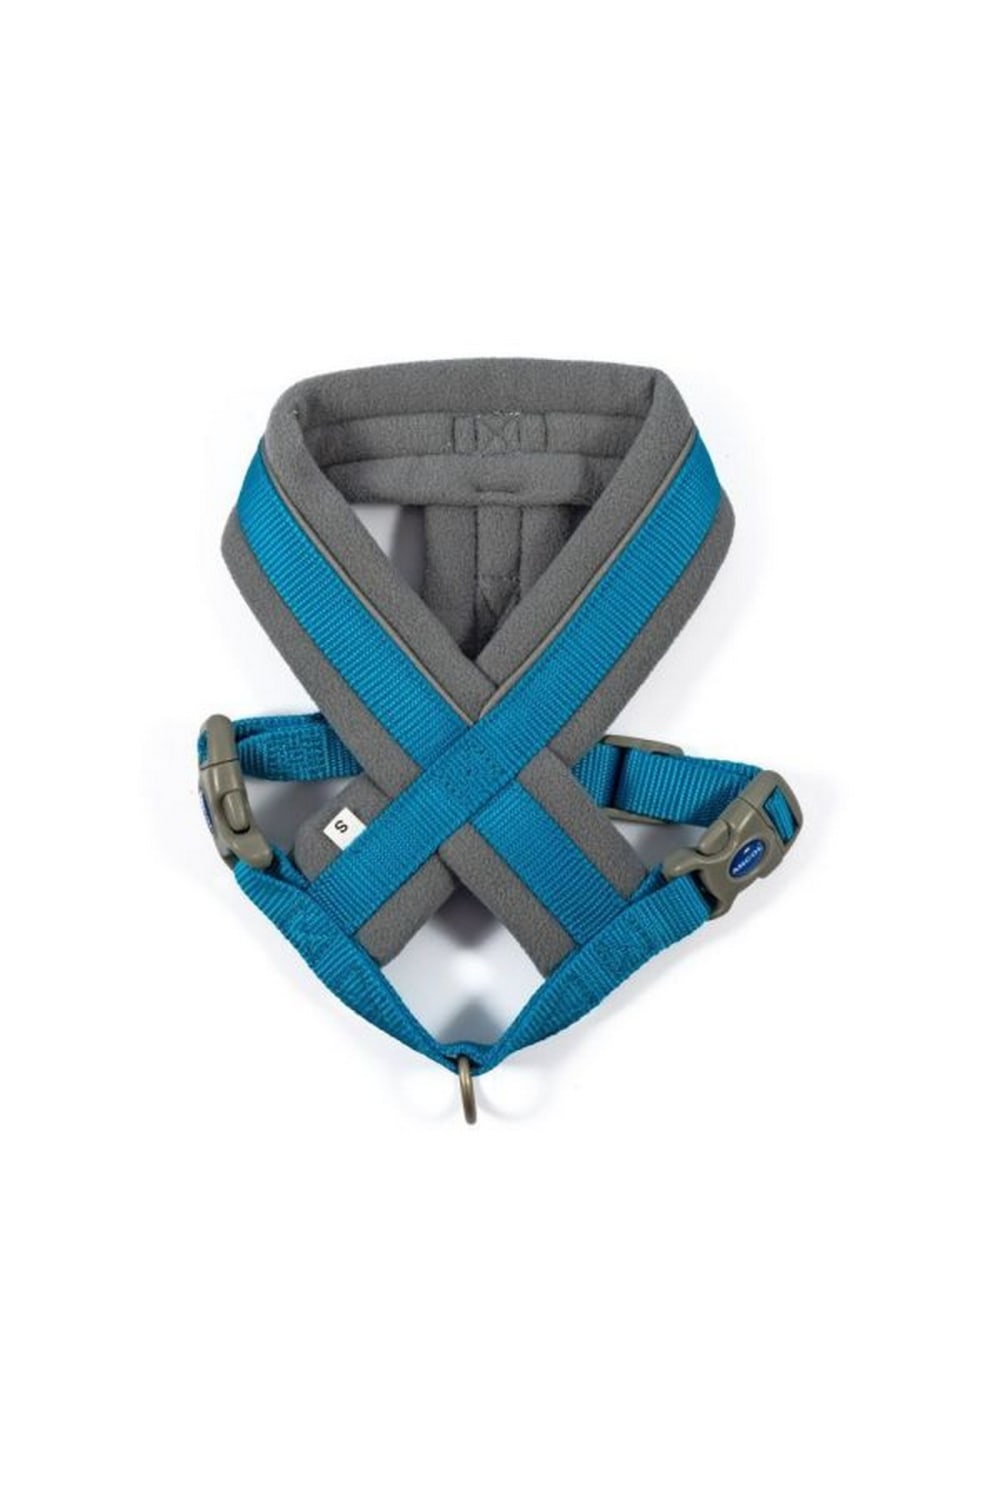 Ancol Padded Dog Harness (Gray/Blue) (14.17in - 16.54in)